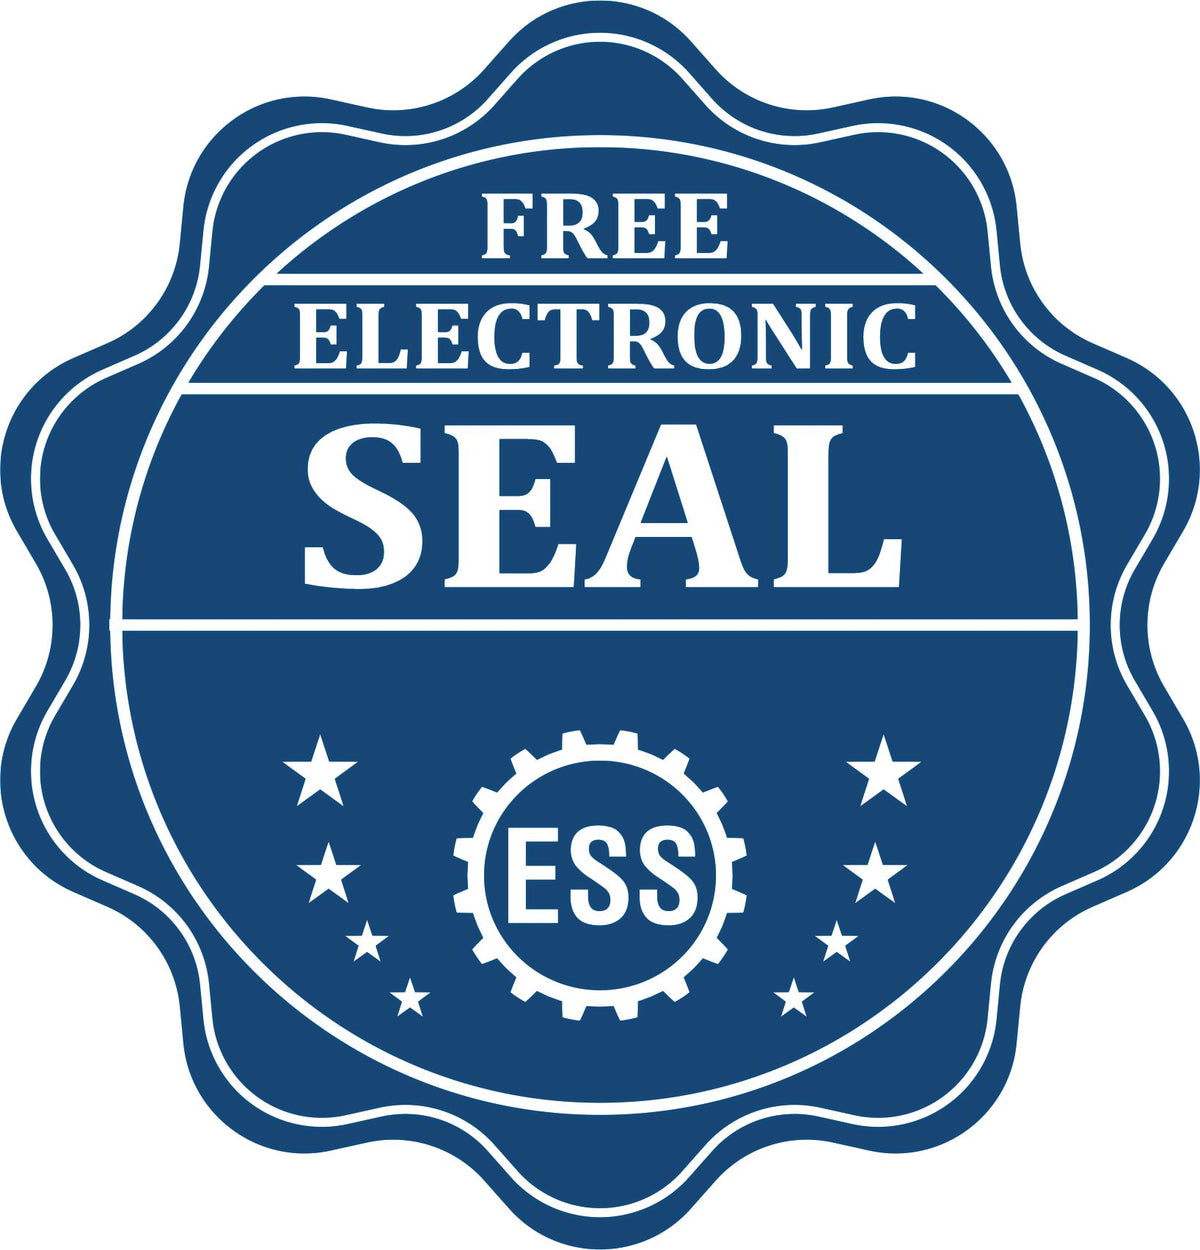 A badge showing a free electronic seal for the Heavy Duty Cast Iron Tennessee Geologist Seal Embosser with stars and the ESS gear on the emblem.